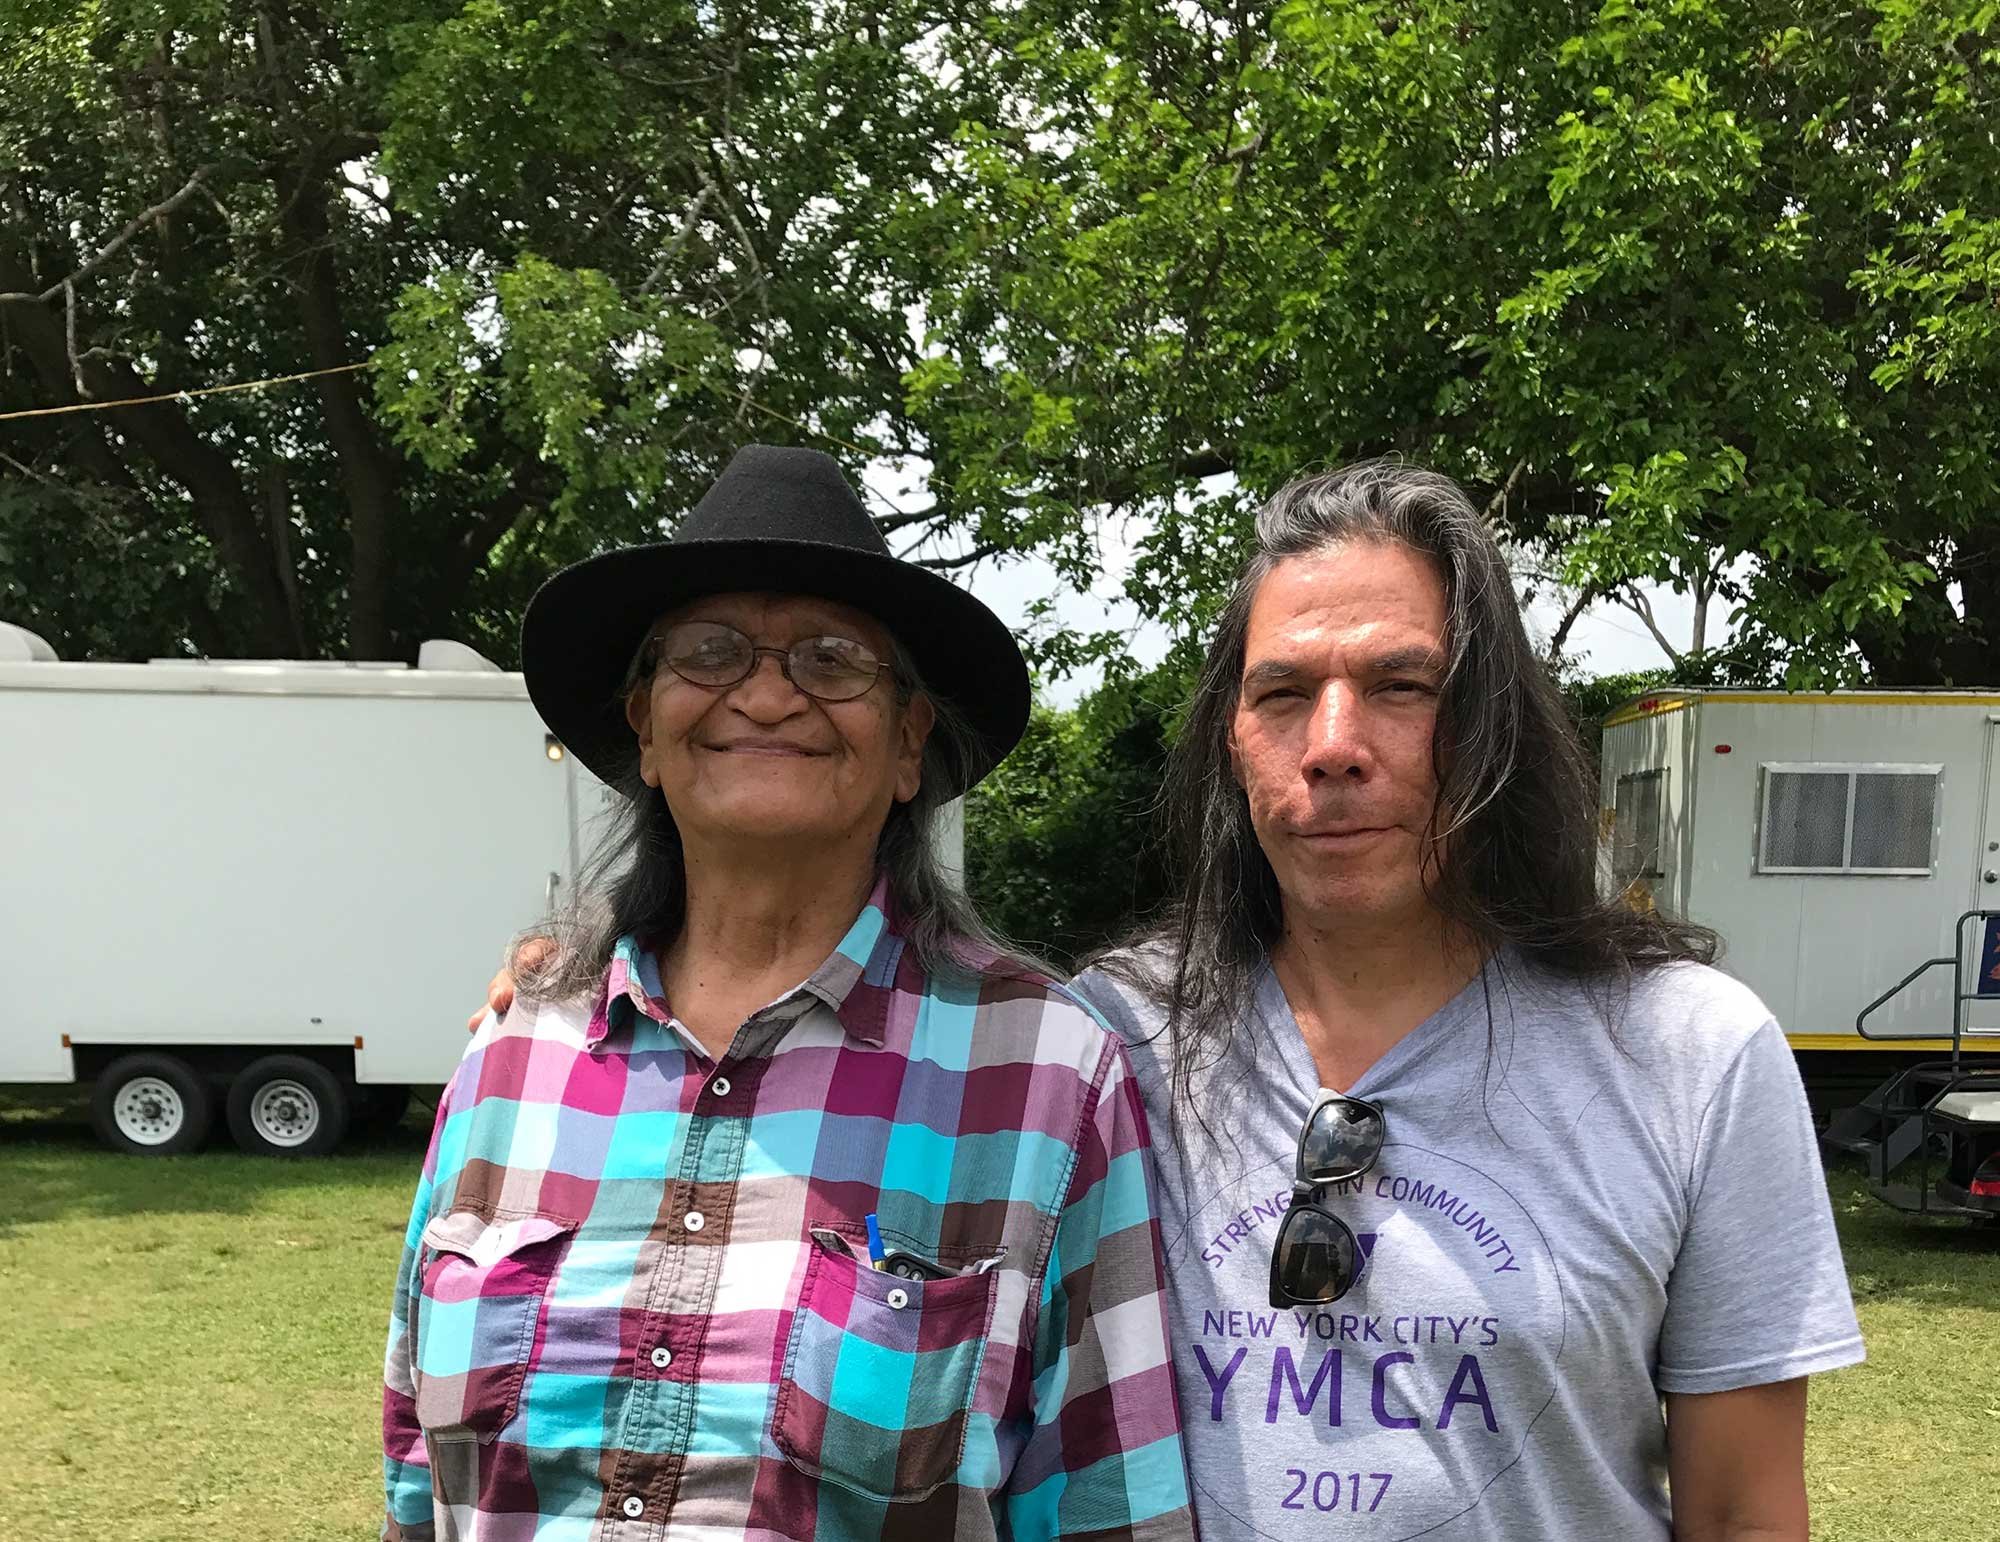  With Quiltman, singer in John Trudell’s Bad Dog band, 2017 